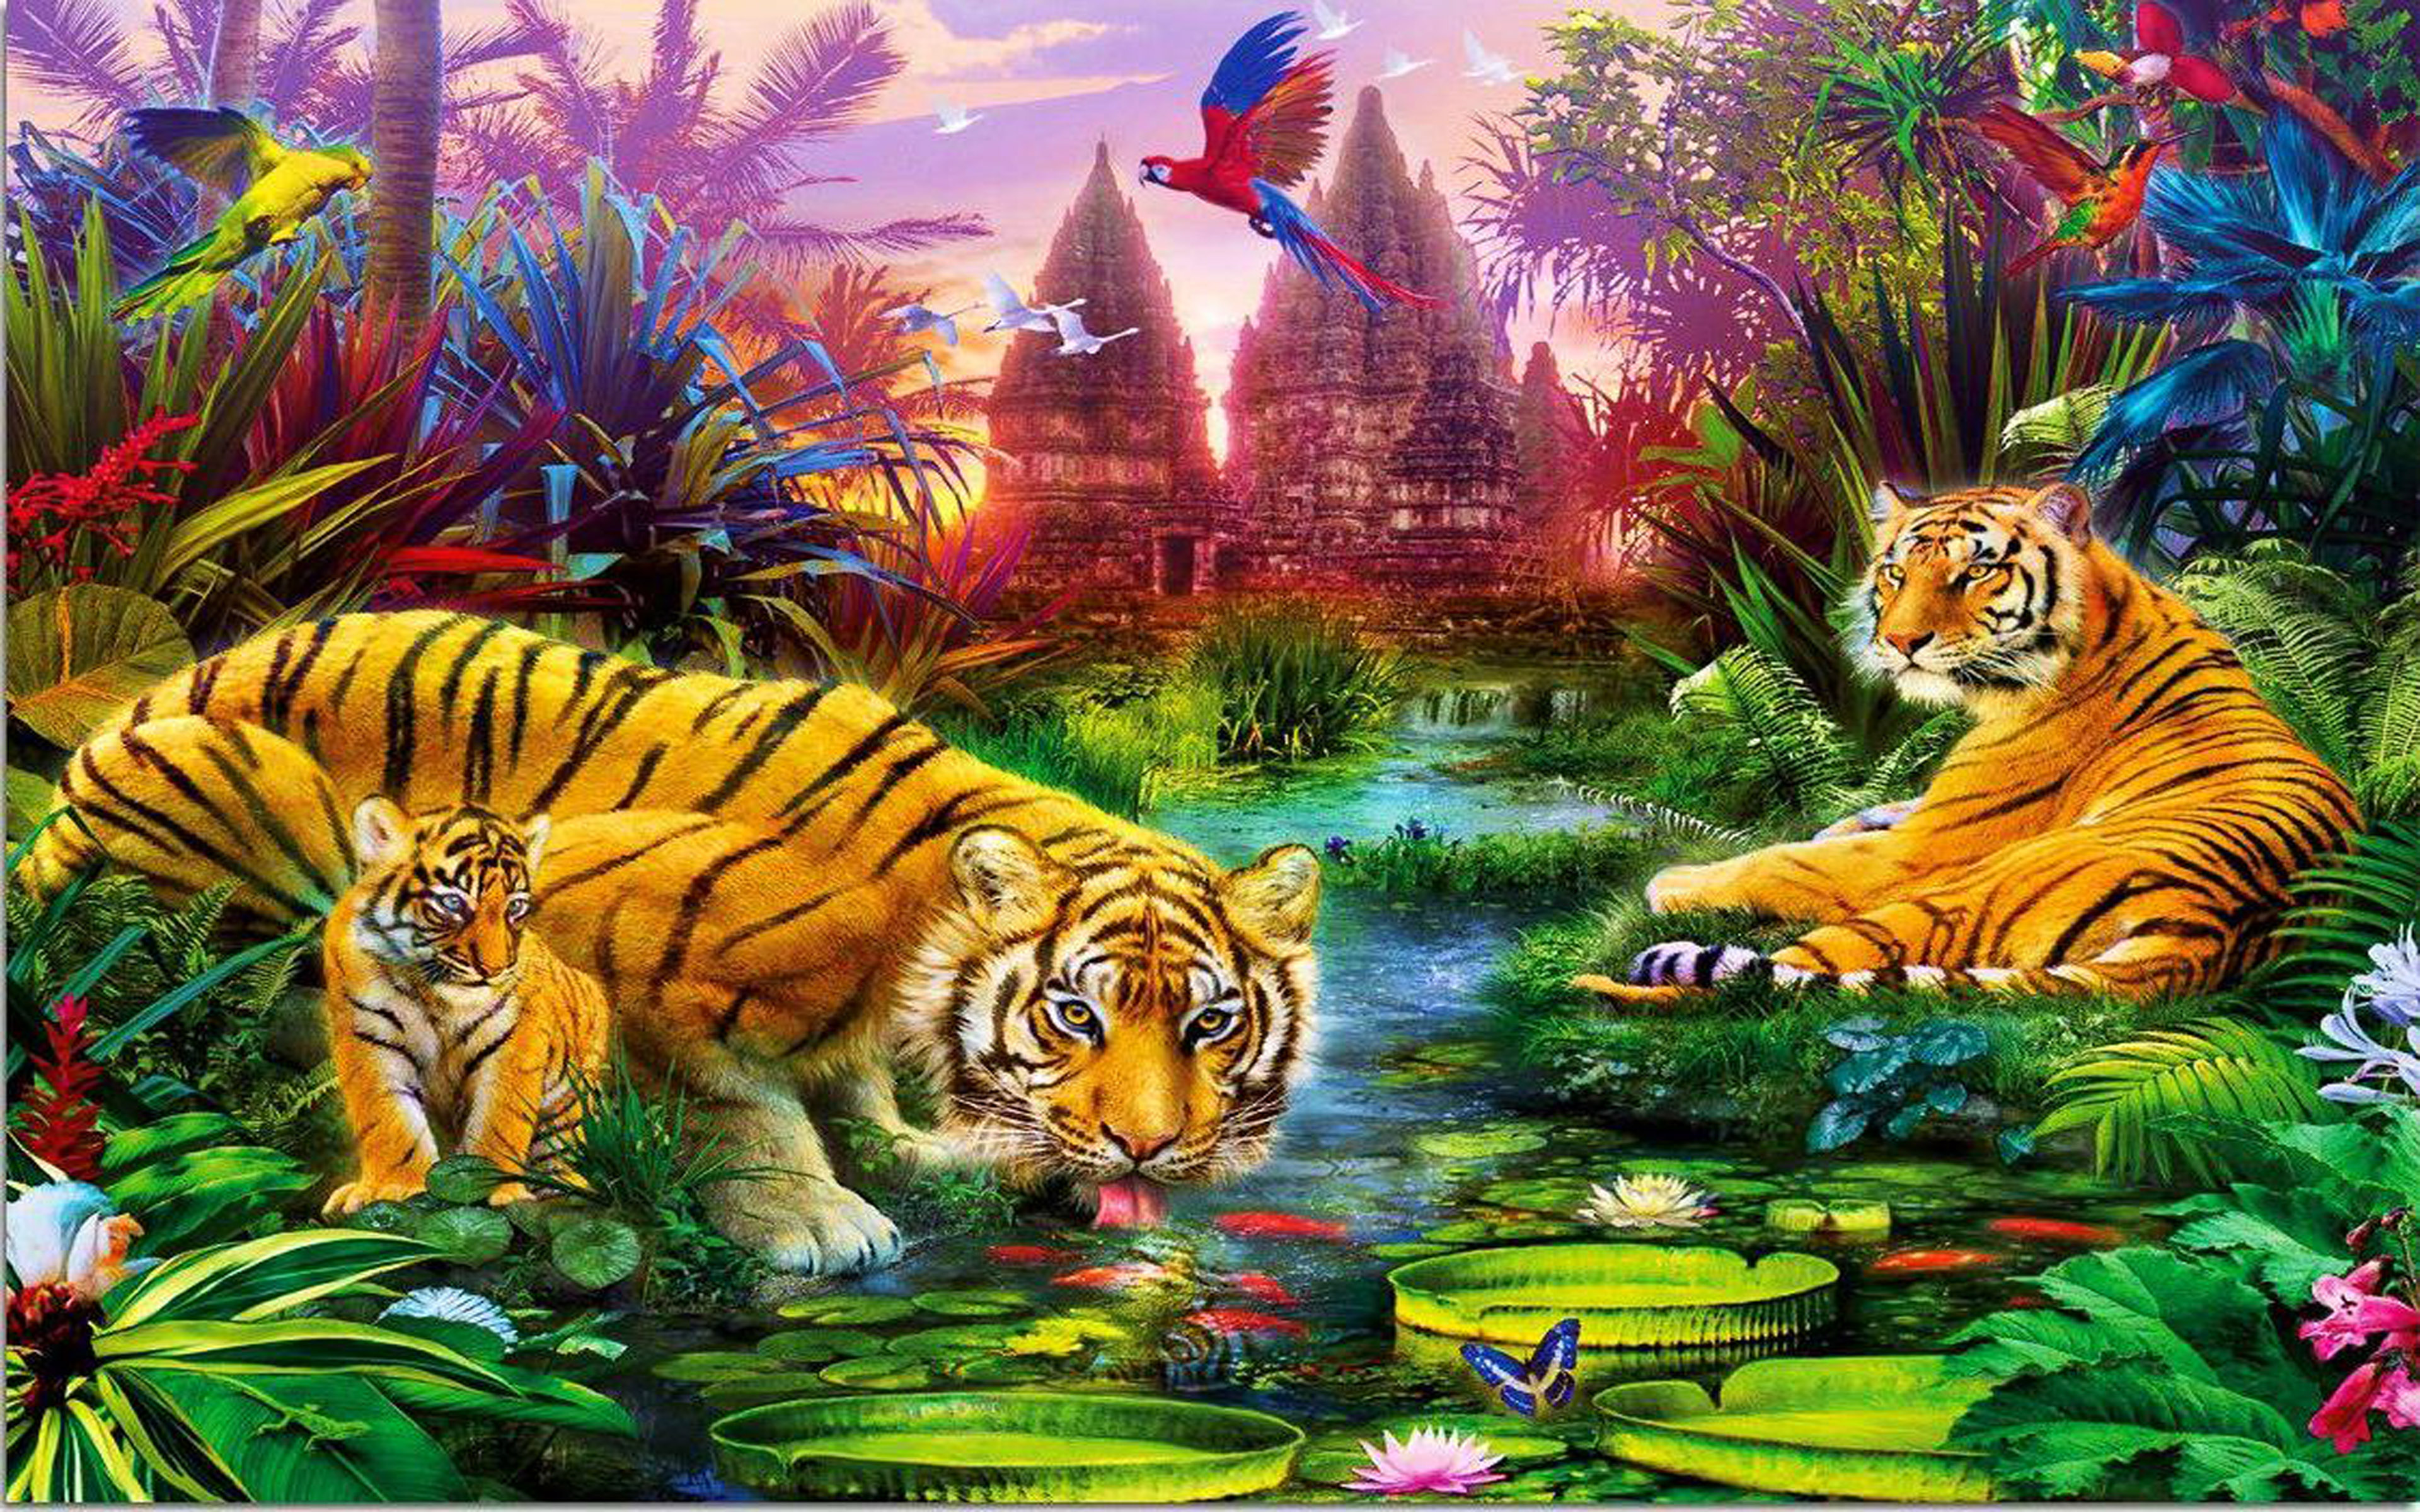 Tiger Family in Paradise